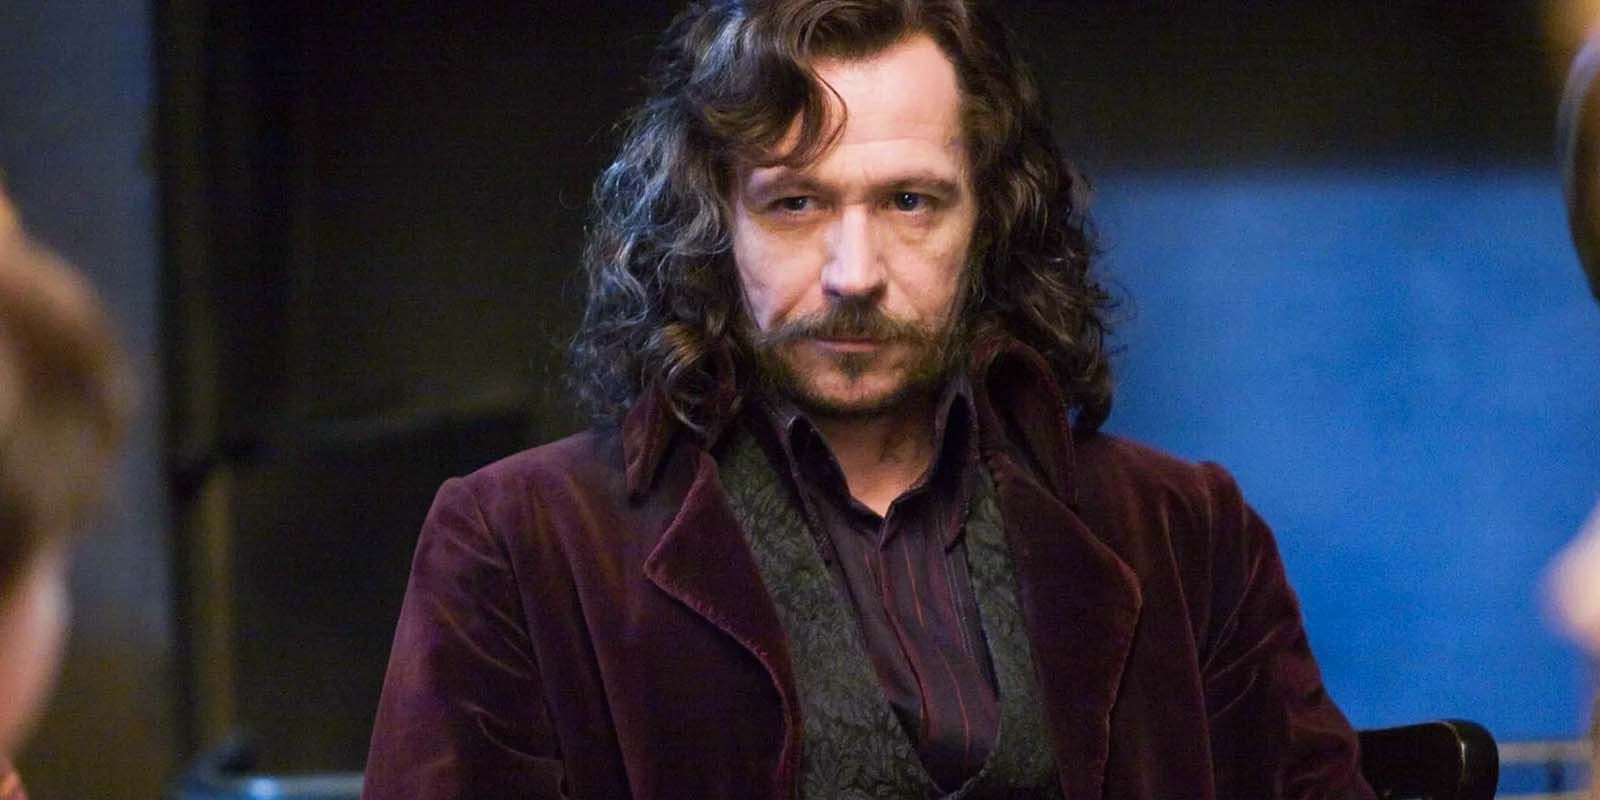 Sirius Black in Harry Potter and the Order of the Phoenix